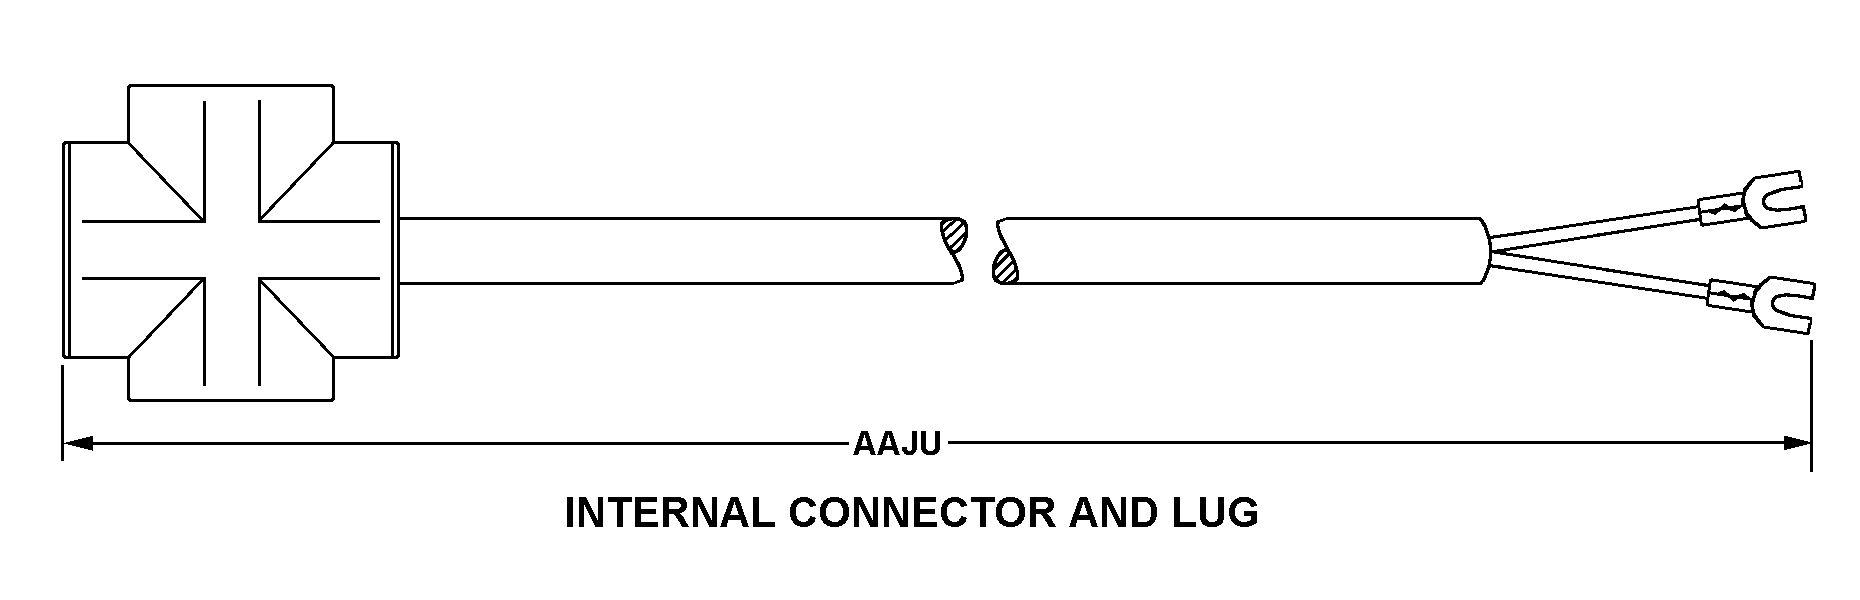 INTERNAL CONNECTOR AND LUG style nsn 6150-01-081-2245